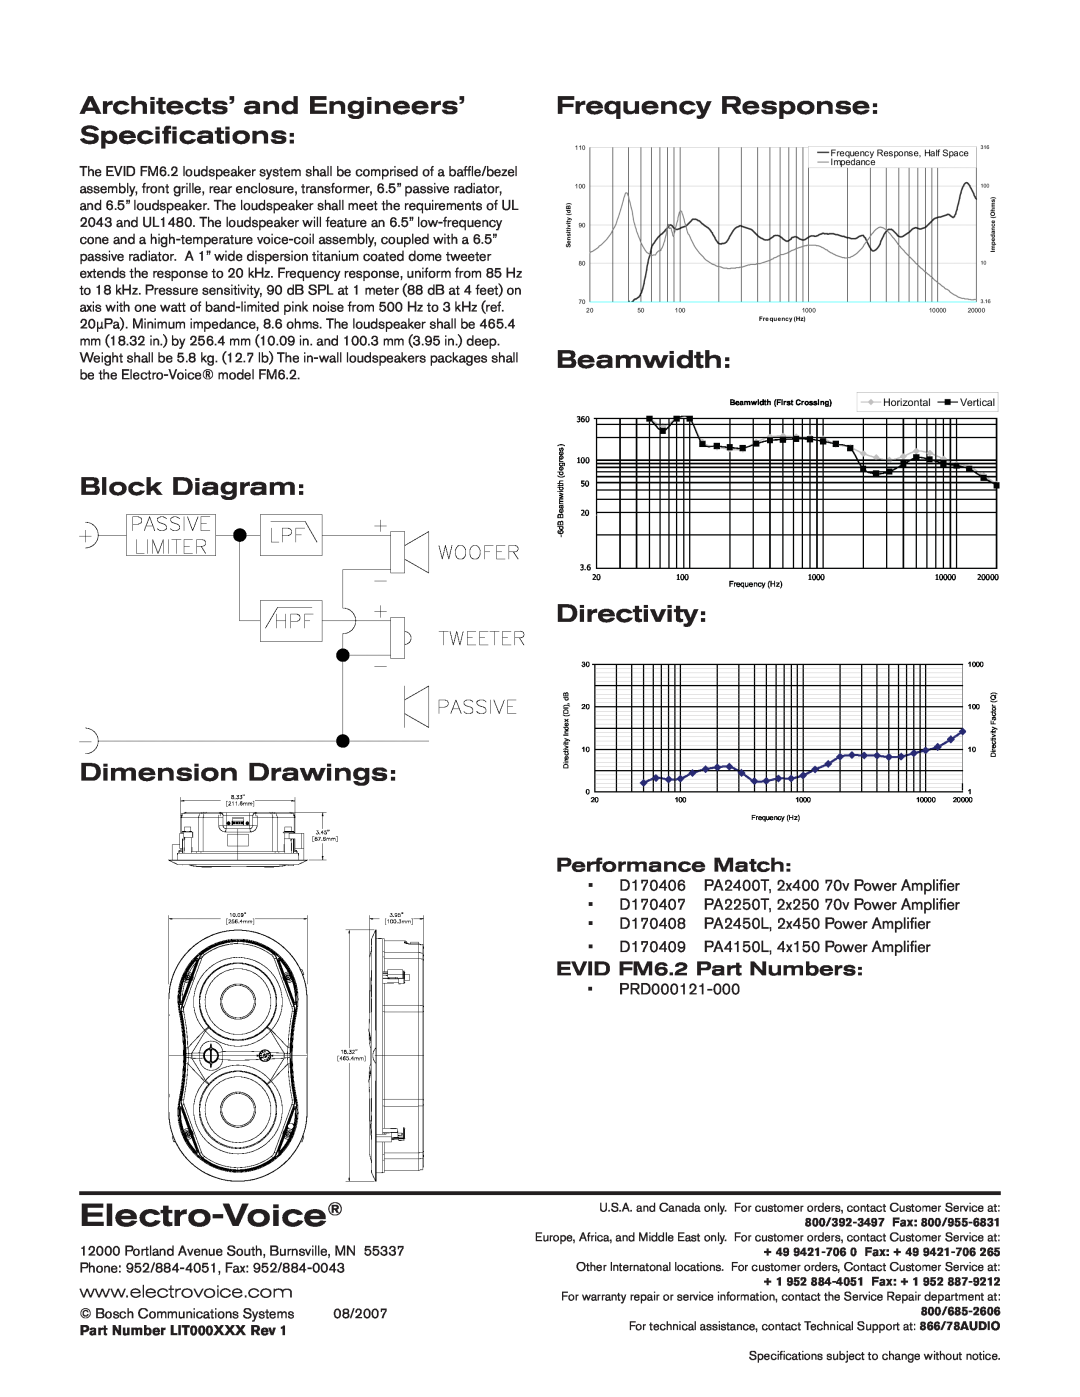 Electro-Voice EVID FM6.2 Architects’ and Engineers’ Specifications, Block Diagram Dimension Drawings, Frequency Response 